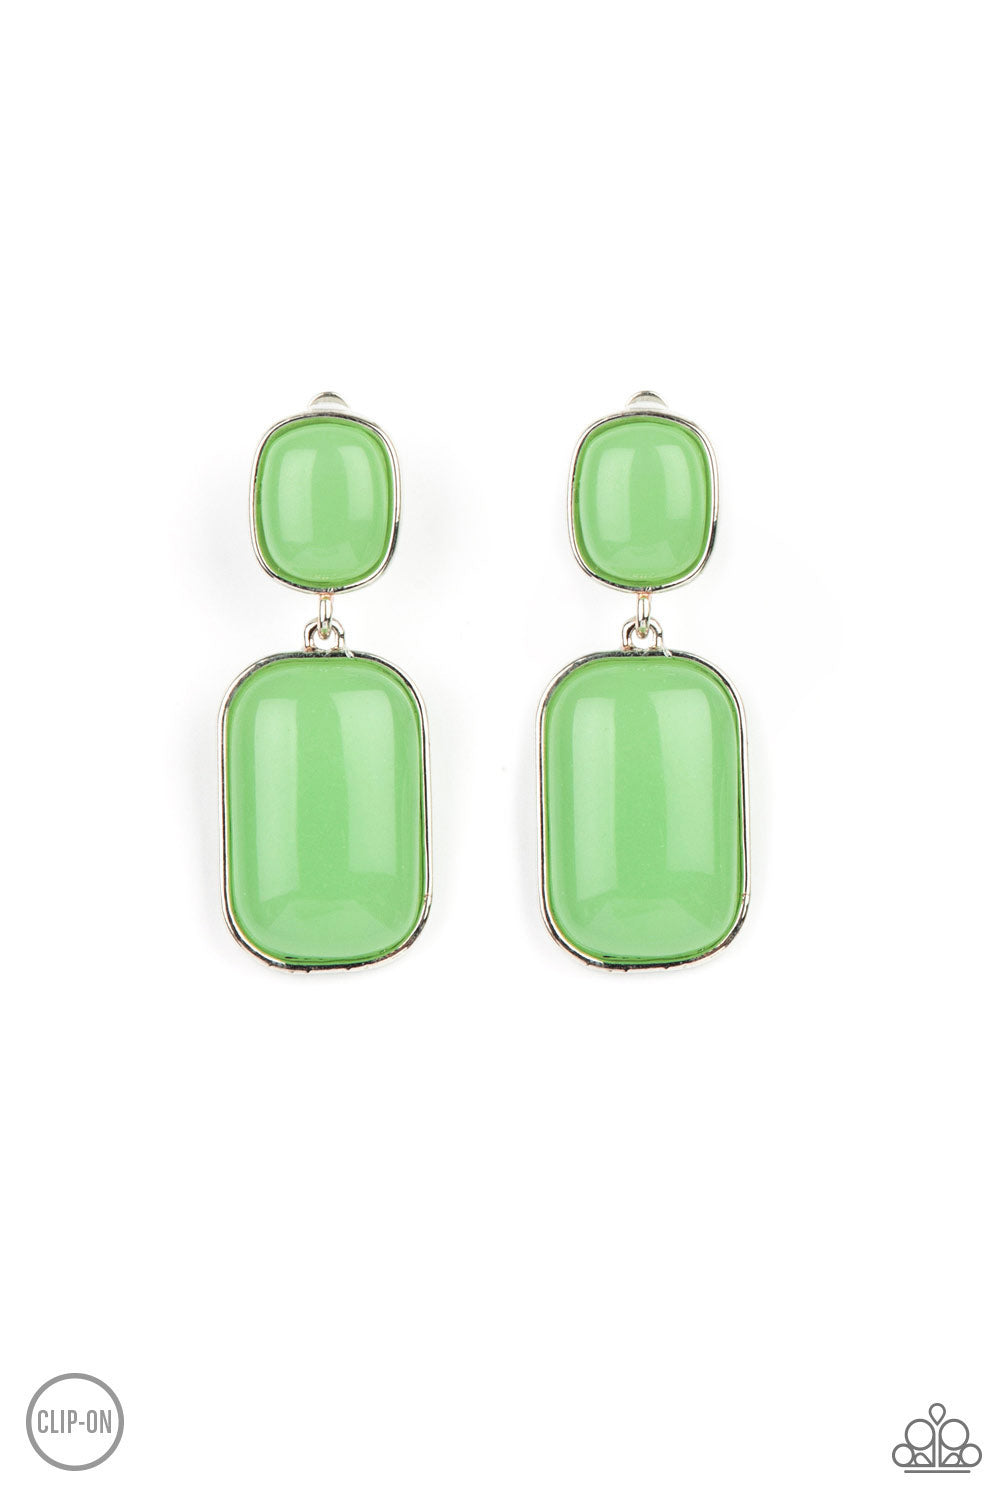 Meet Me At The Plaza Green Clip-On Earring - Paparazzi Accessories  Encased in sleek silver frames, milky Green Ash beads link into an oversized lure for a whimsically refined flair. Earring attaches to a standard clip-on fitting.  All Paparazzi Accessories are lead free and nickel free!  Sold as one pair of clip-on earrings.